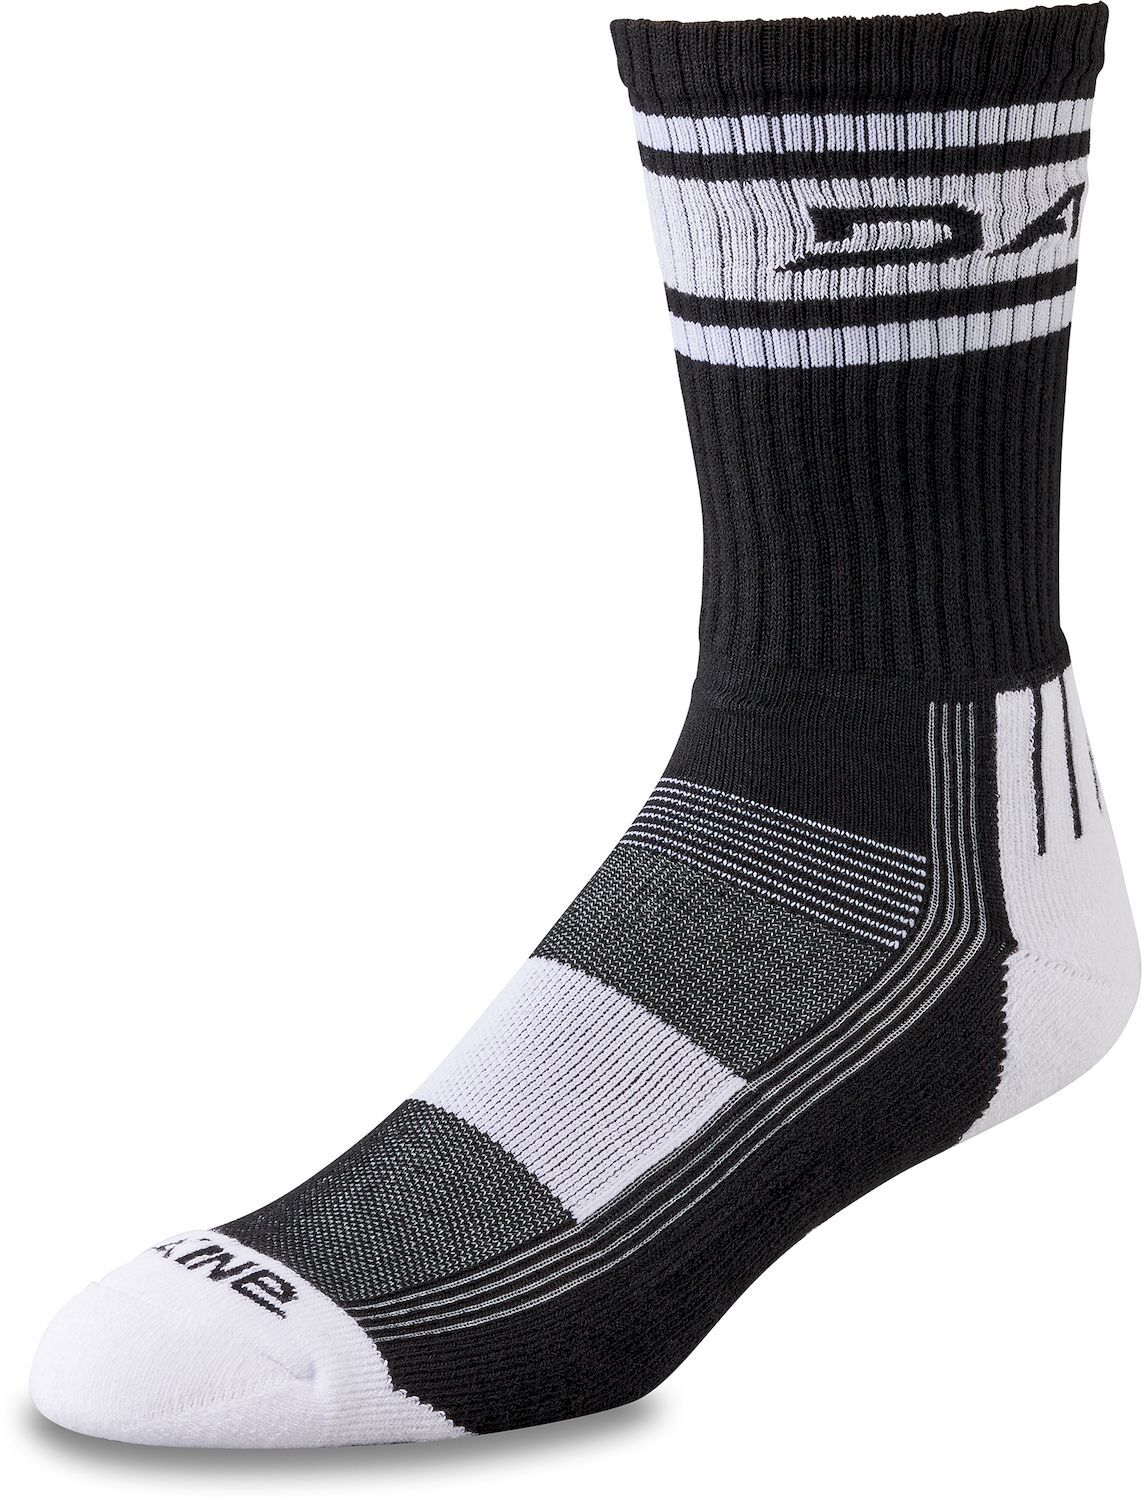 Dakine Step Up - Calcetines ciclismo